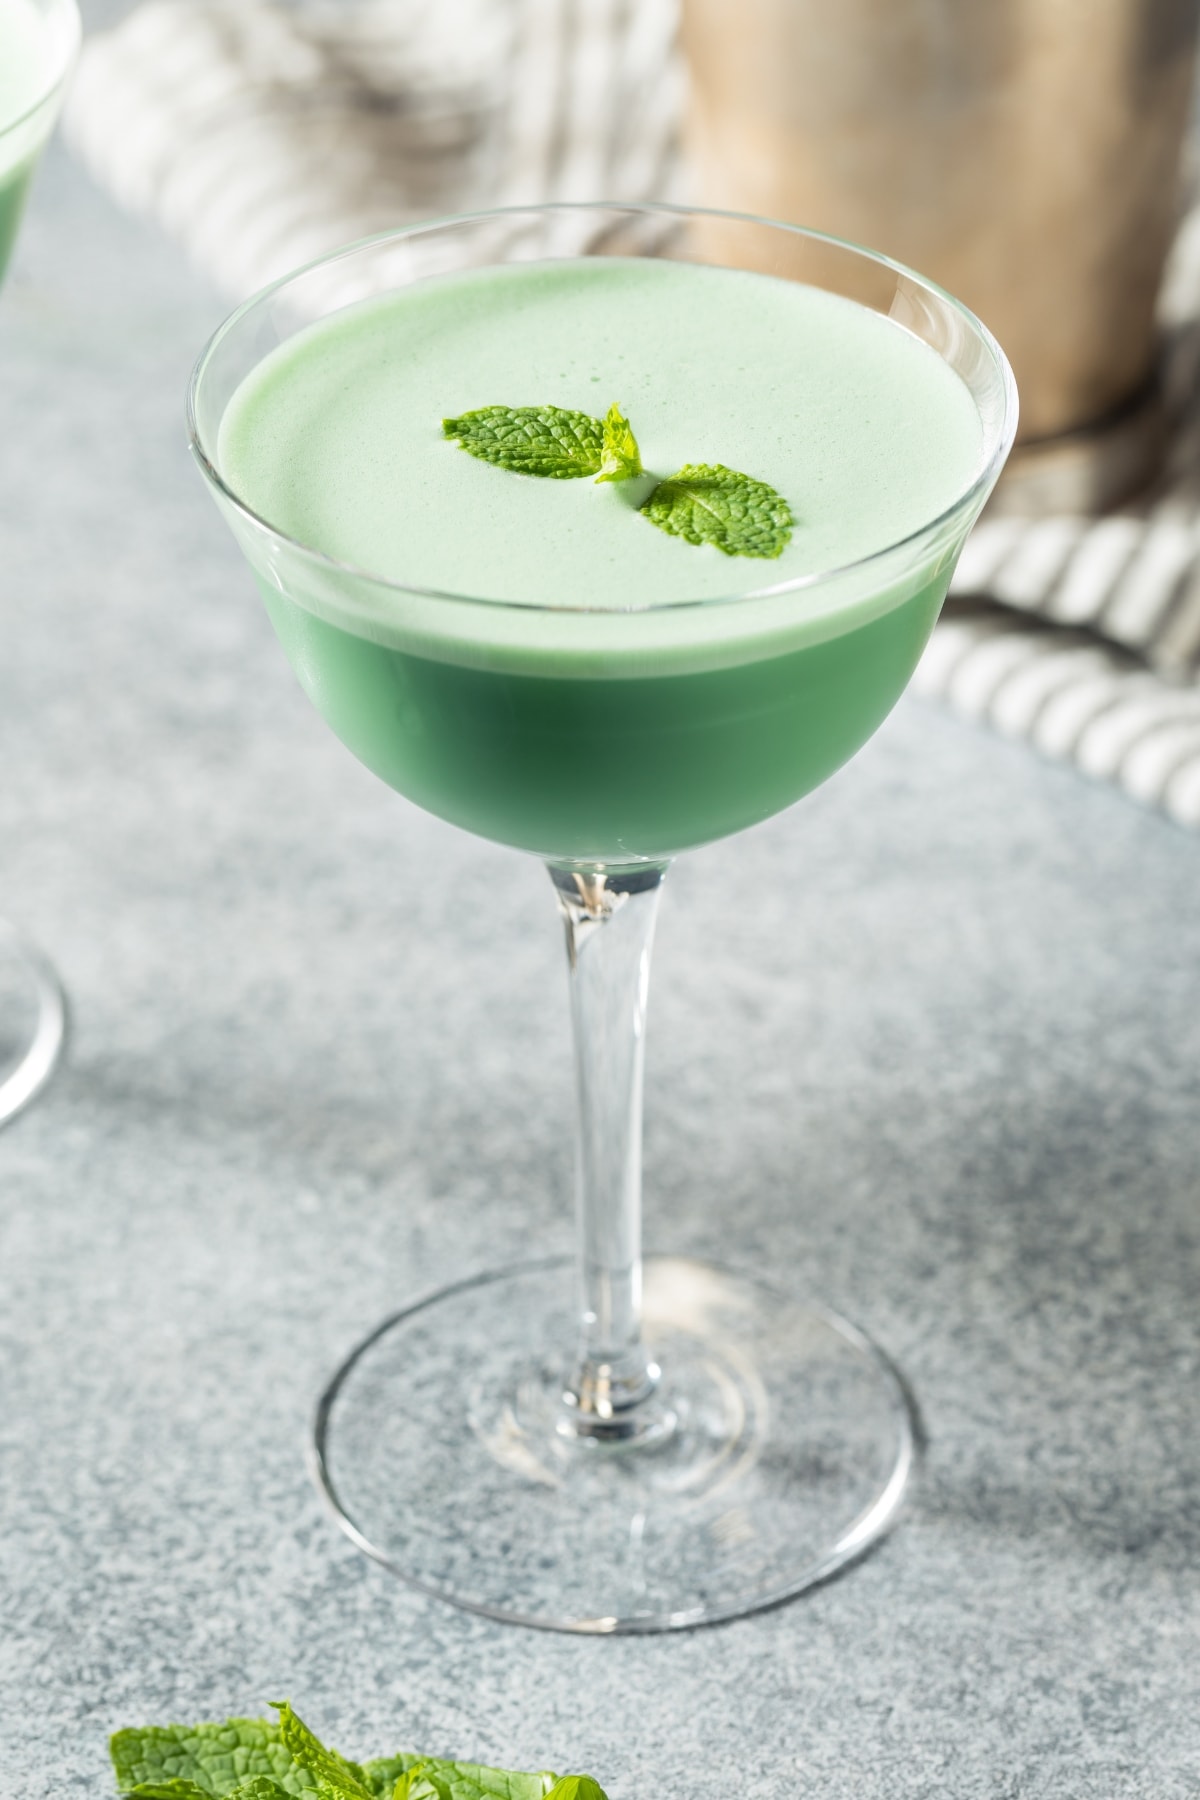 Creamy and Boozy Grasshopper Cocktail with Mint
